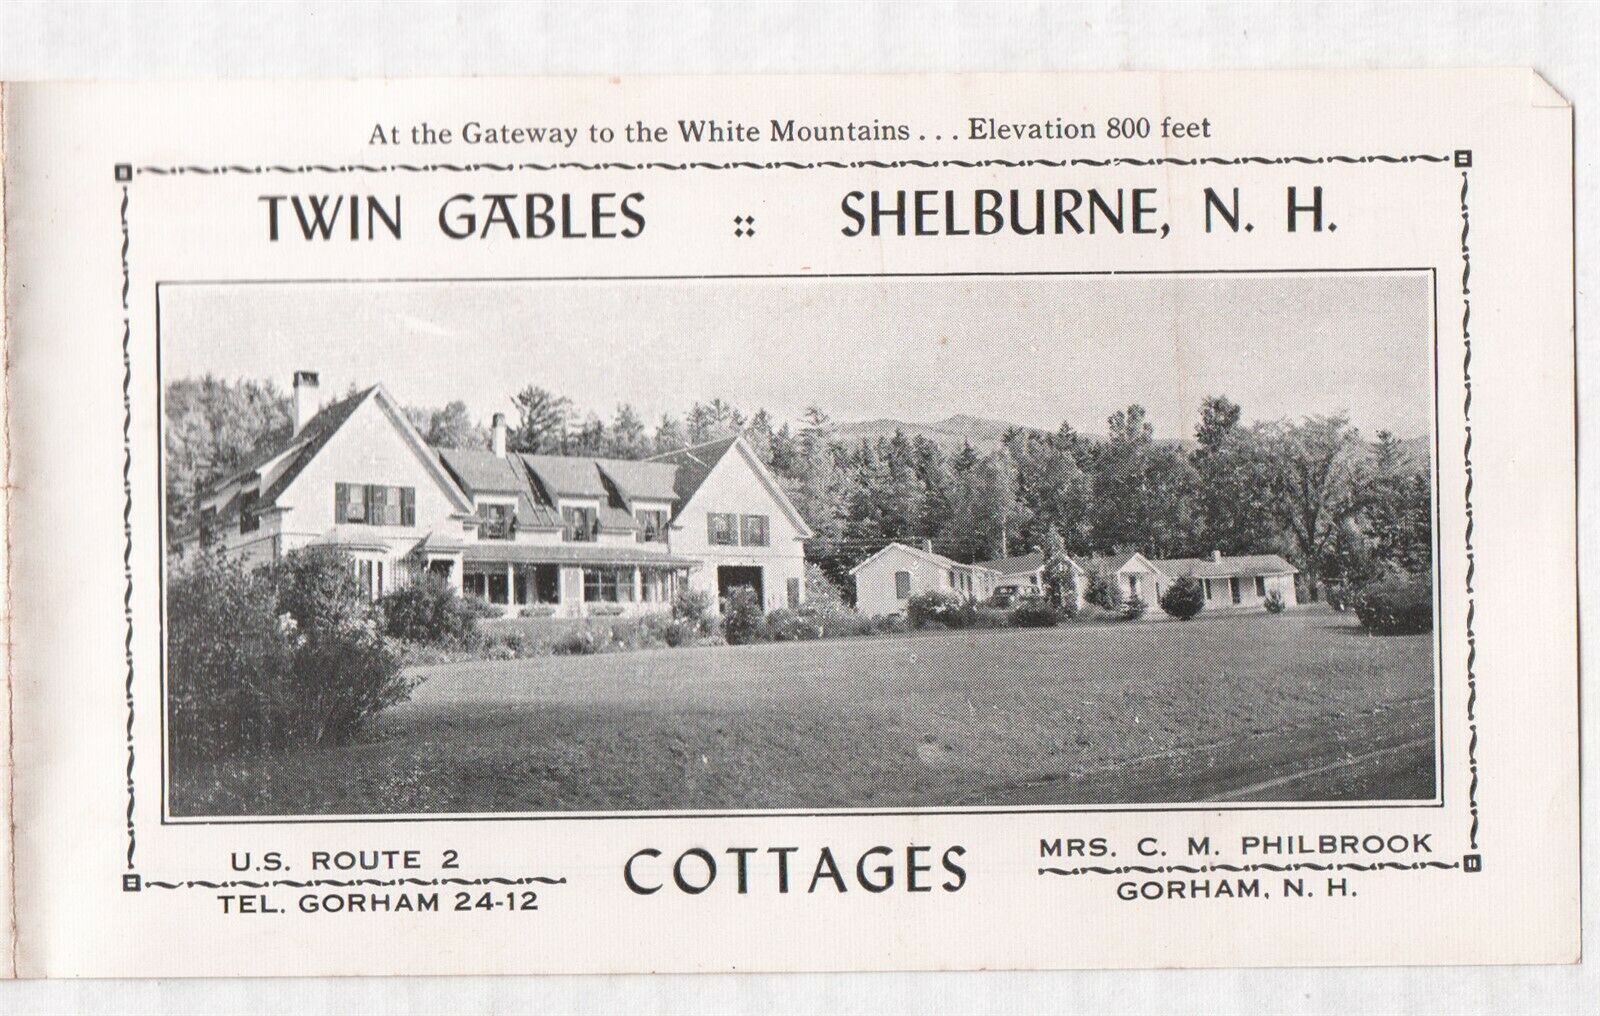 Twin Gables Shelburne New Hampshire Cottages - Vintage Brochure Free Shipping